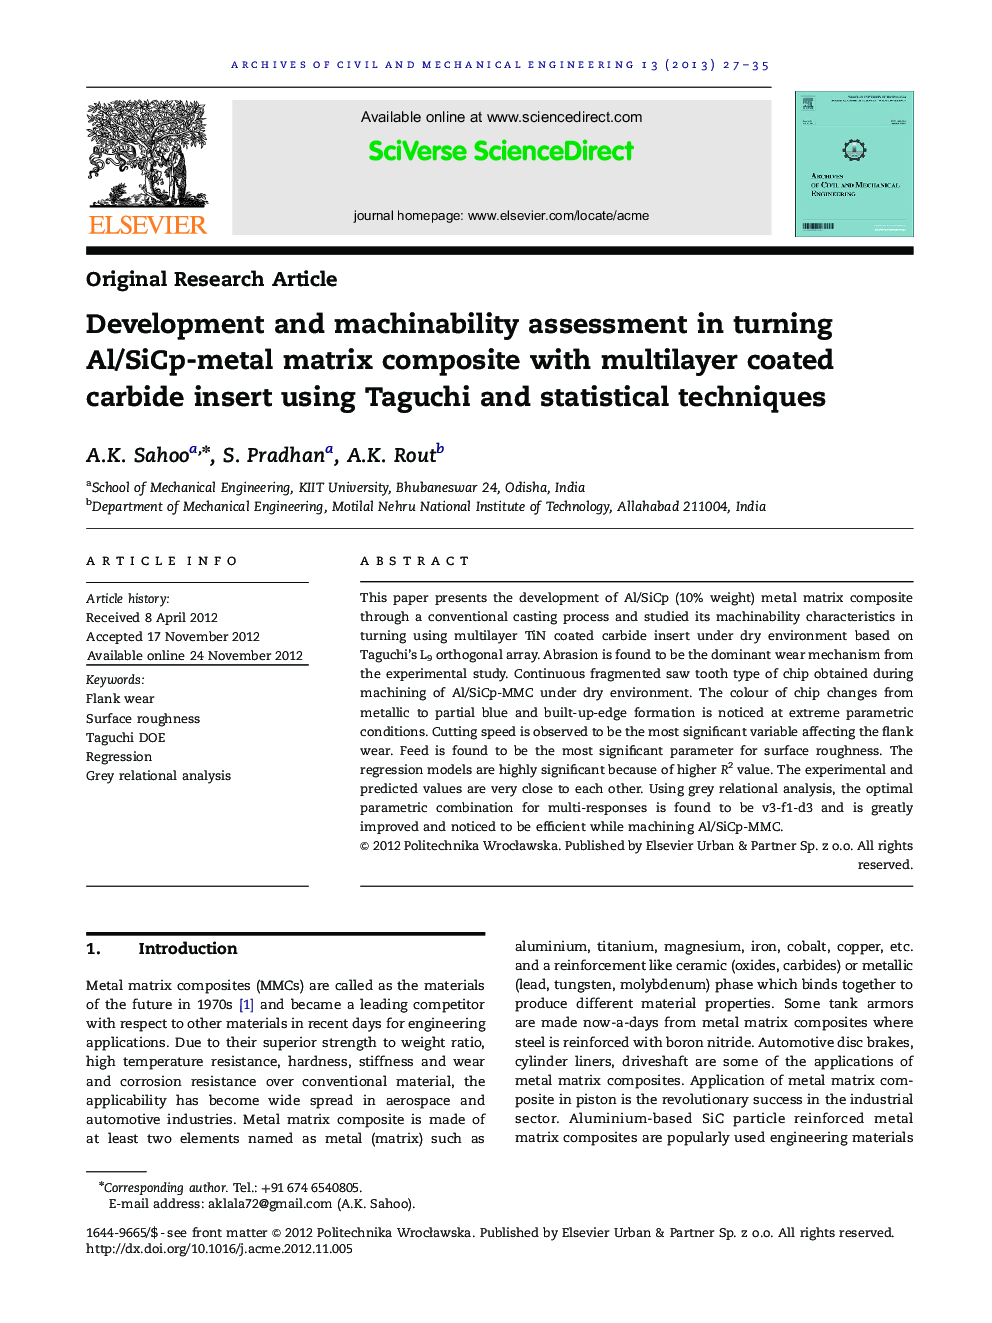 Development and machinability assessment in turning Al/SiCp-metal matrix composite with multilayer coated carbide insert using Taguchi and statistical techniques